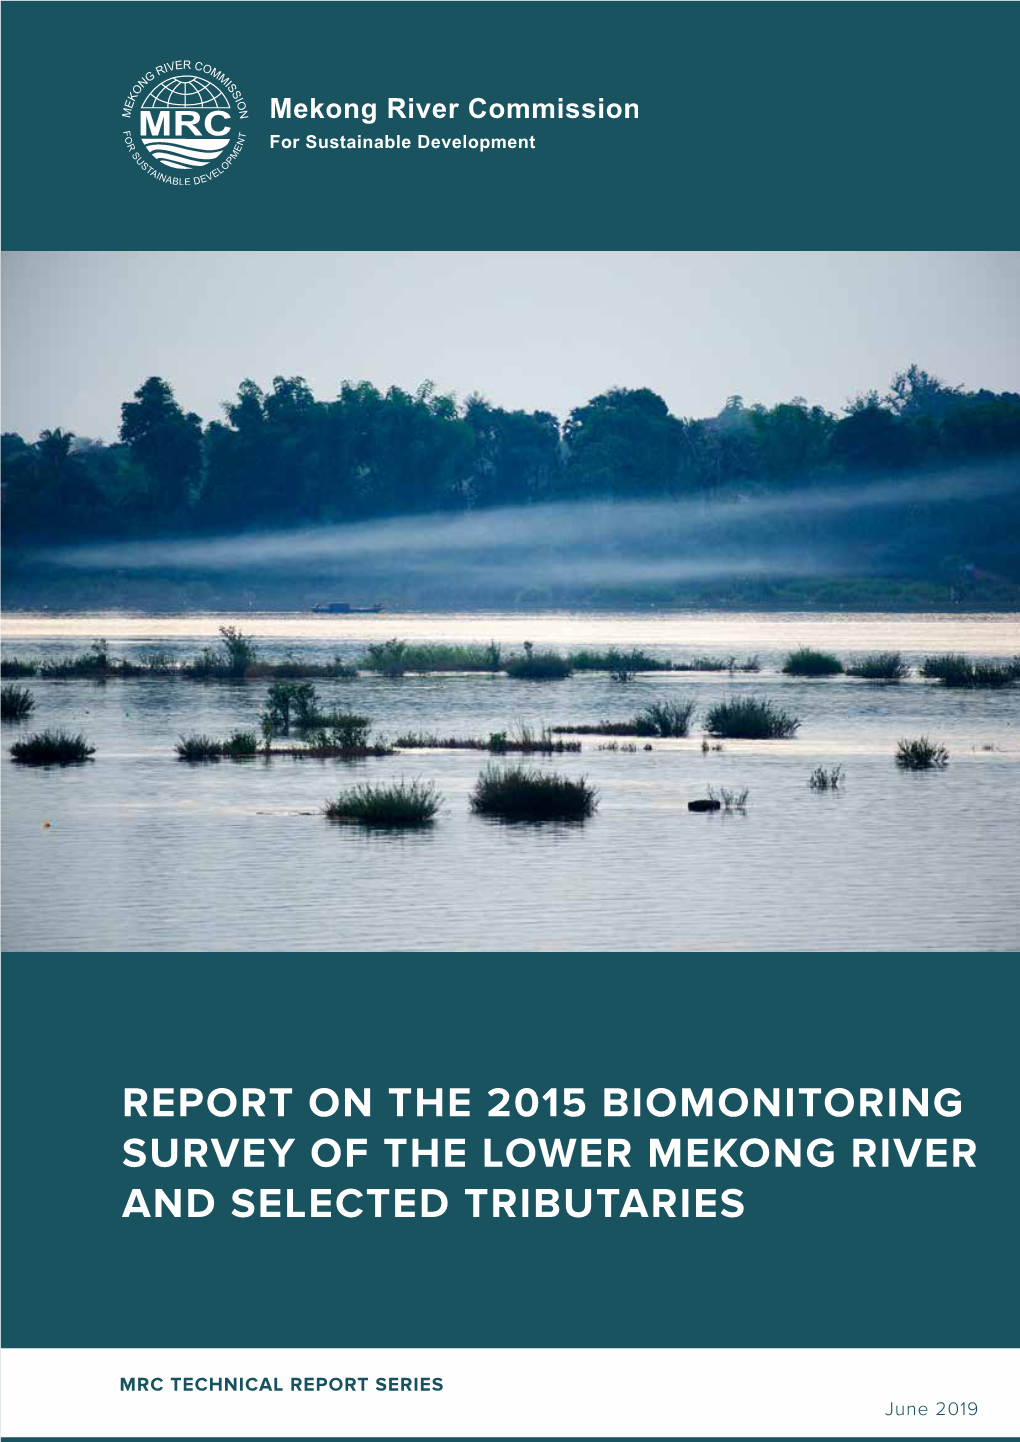 Report on the 2015 Biomonitoring Survey of the Lower Mekong River and Selected Tributaries